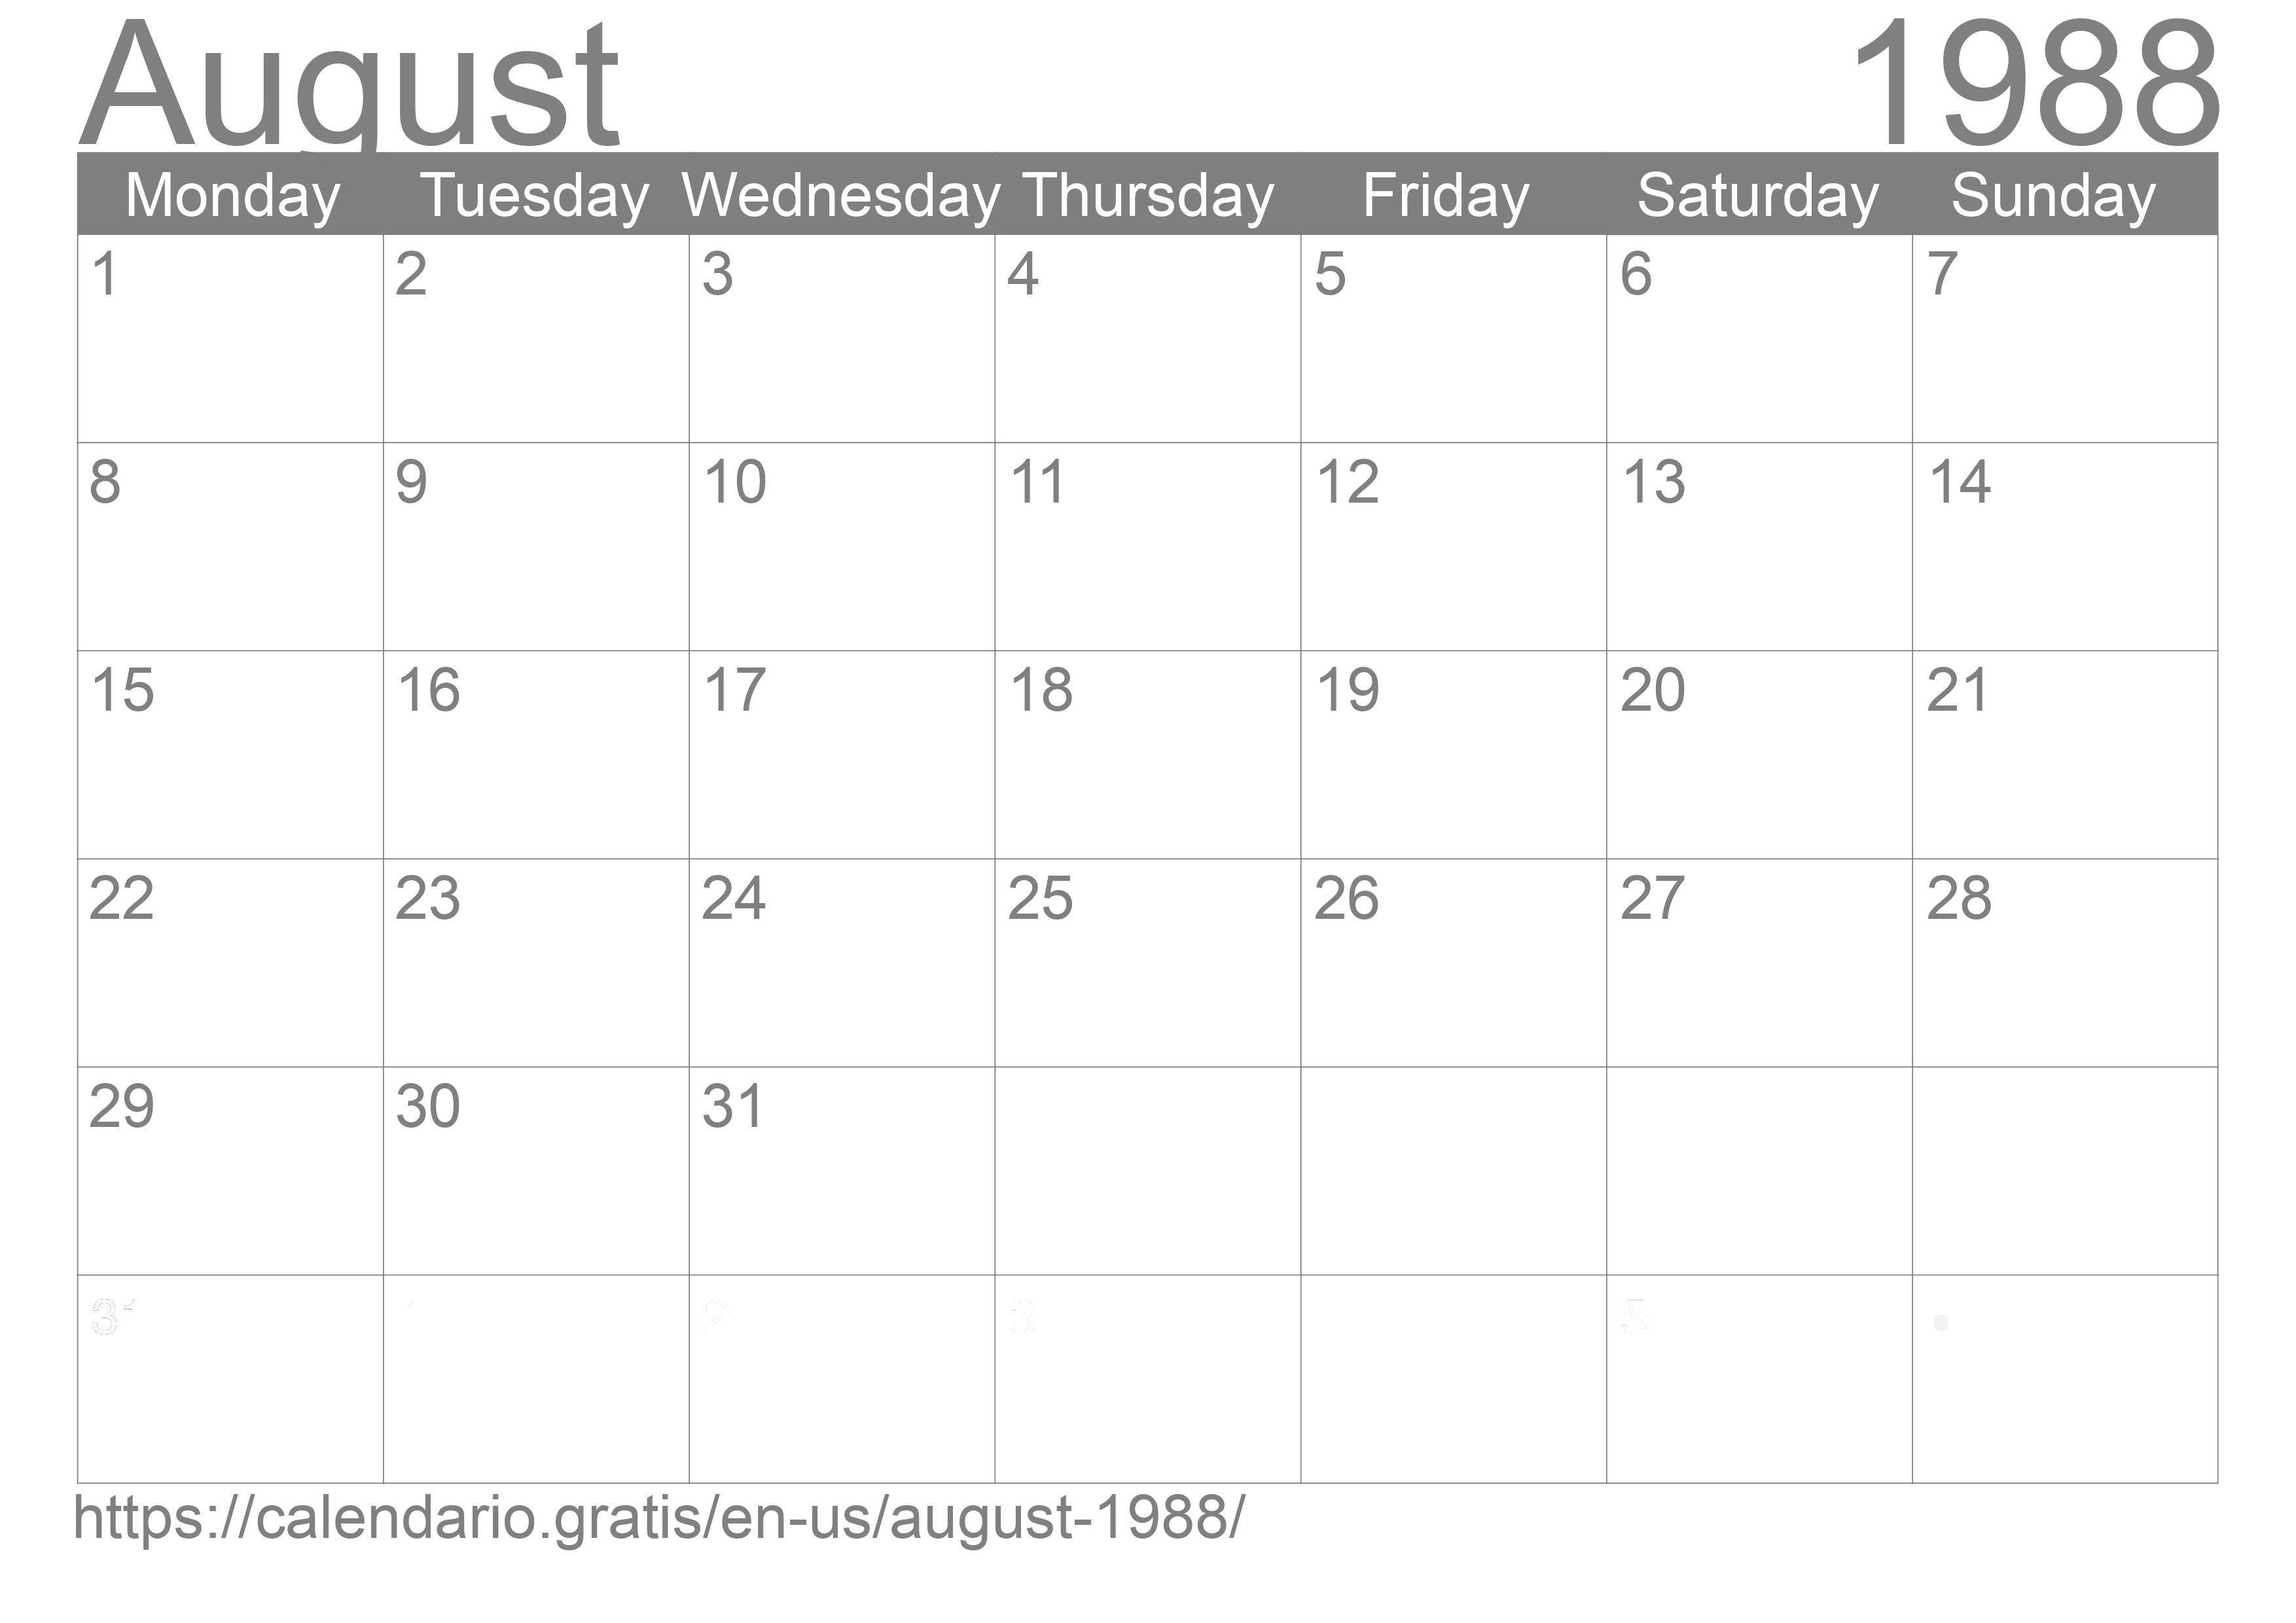 Calendar August 1988 from United States of America in English ☑️